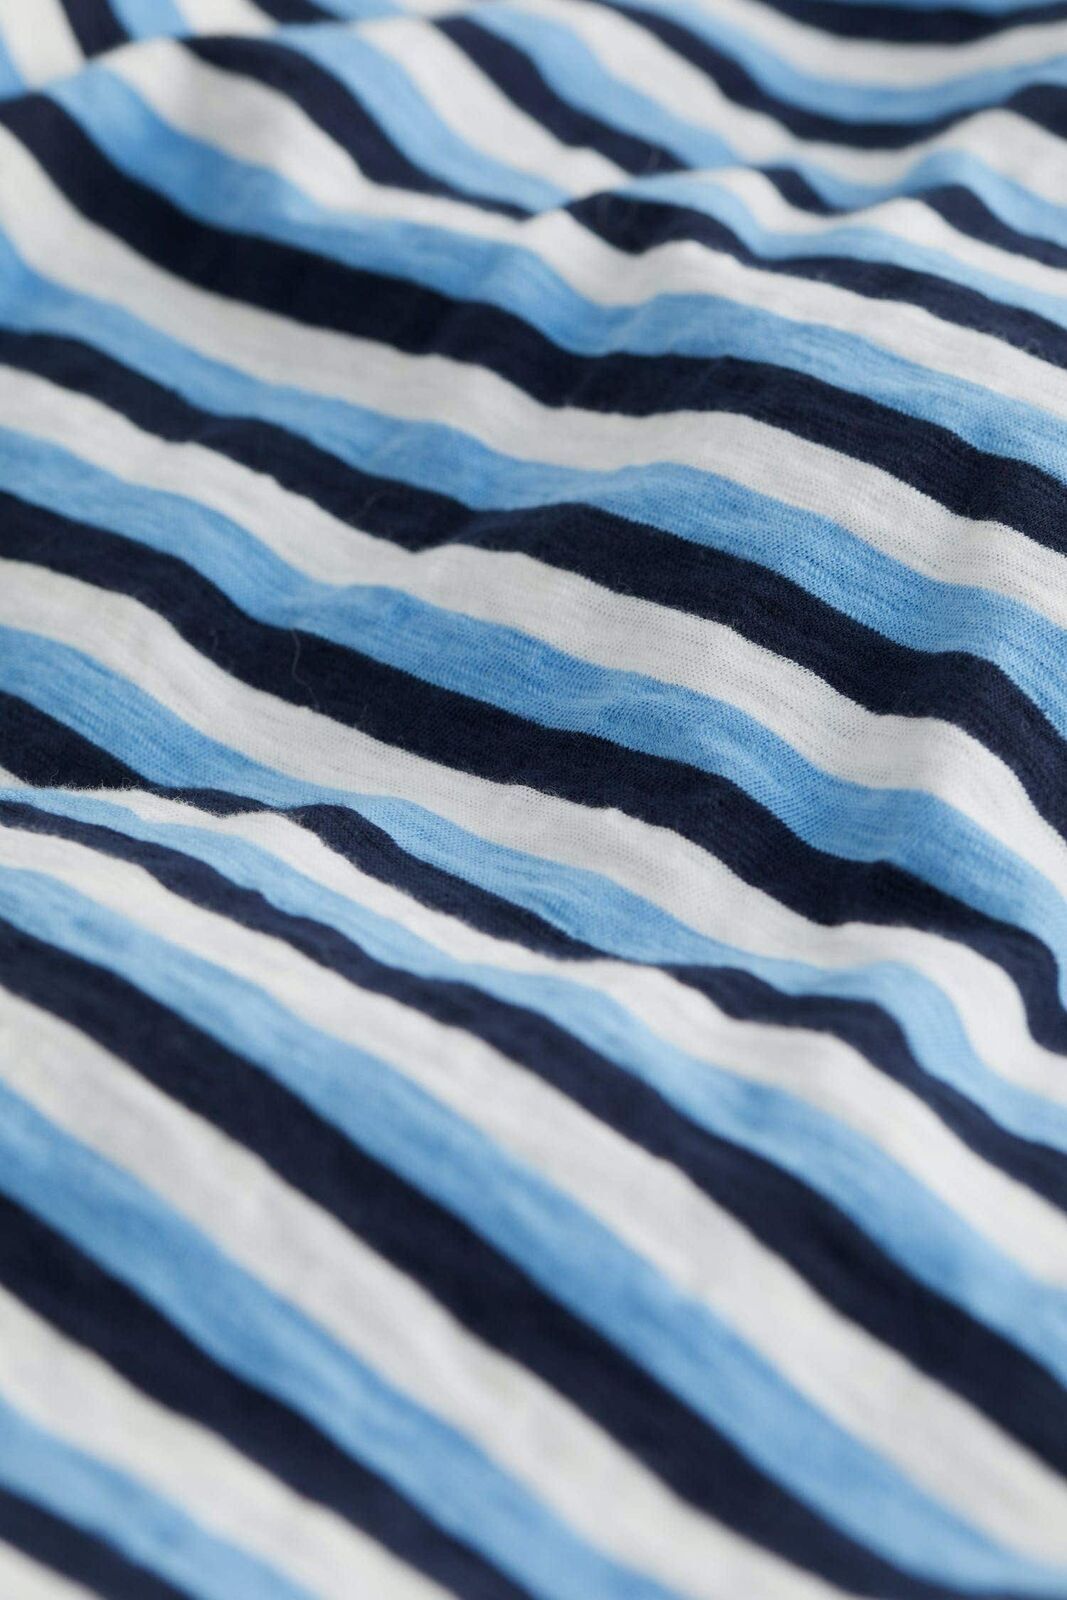 EX SEASALT Blue Striped Reflection T-Shirt in Sizes 8, 12, 14, 20, 26/28